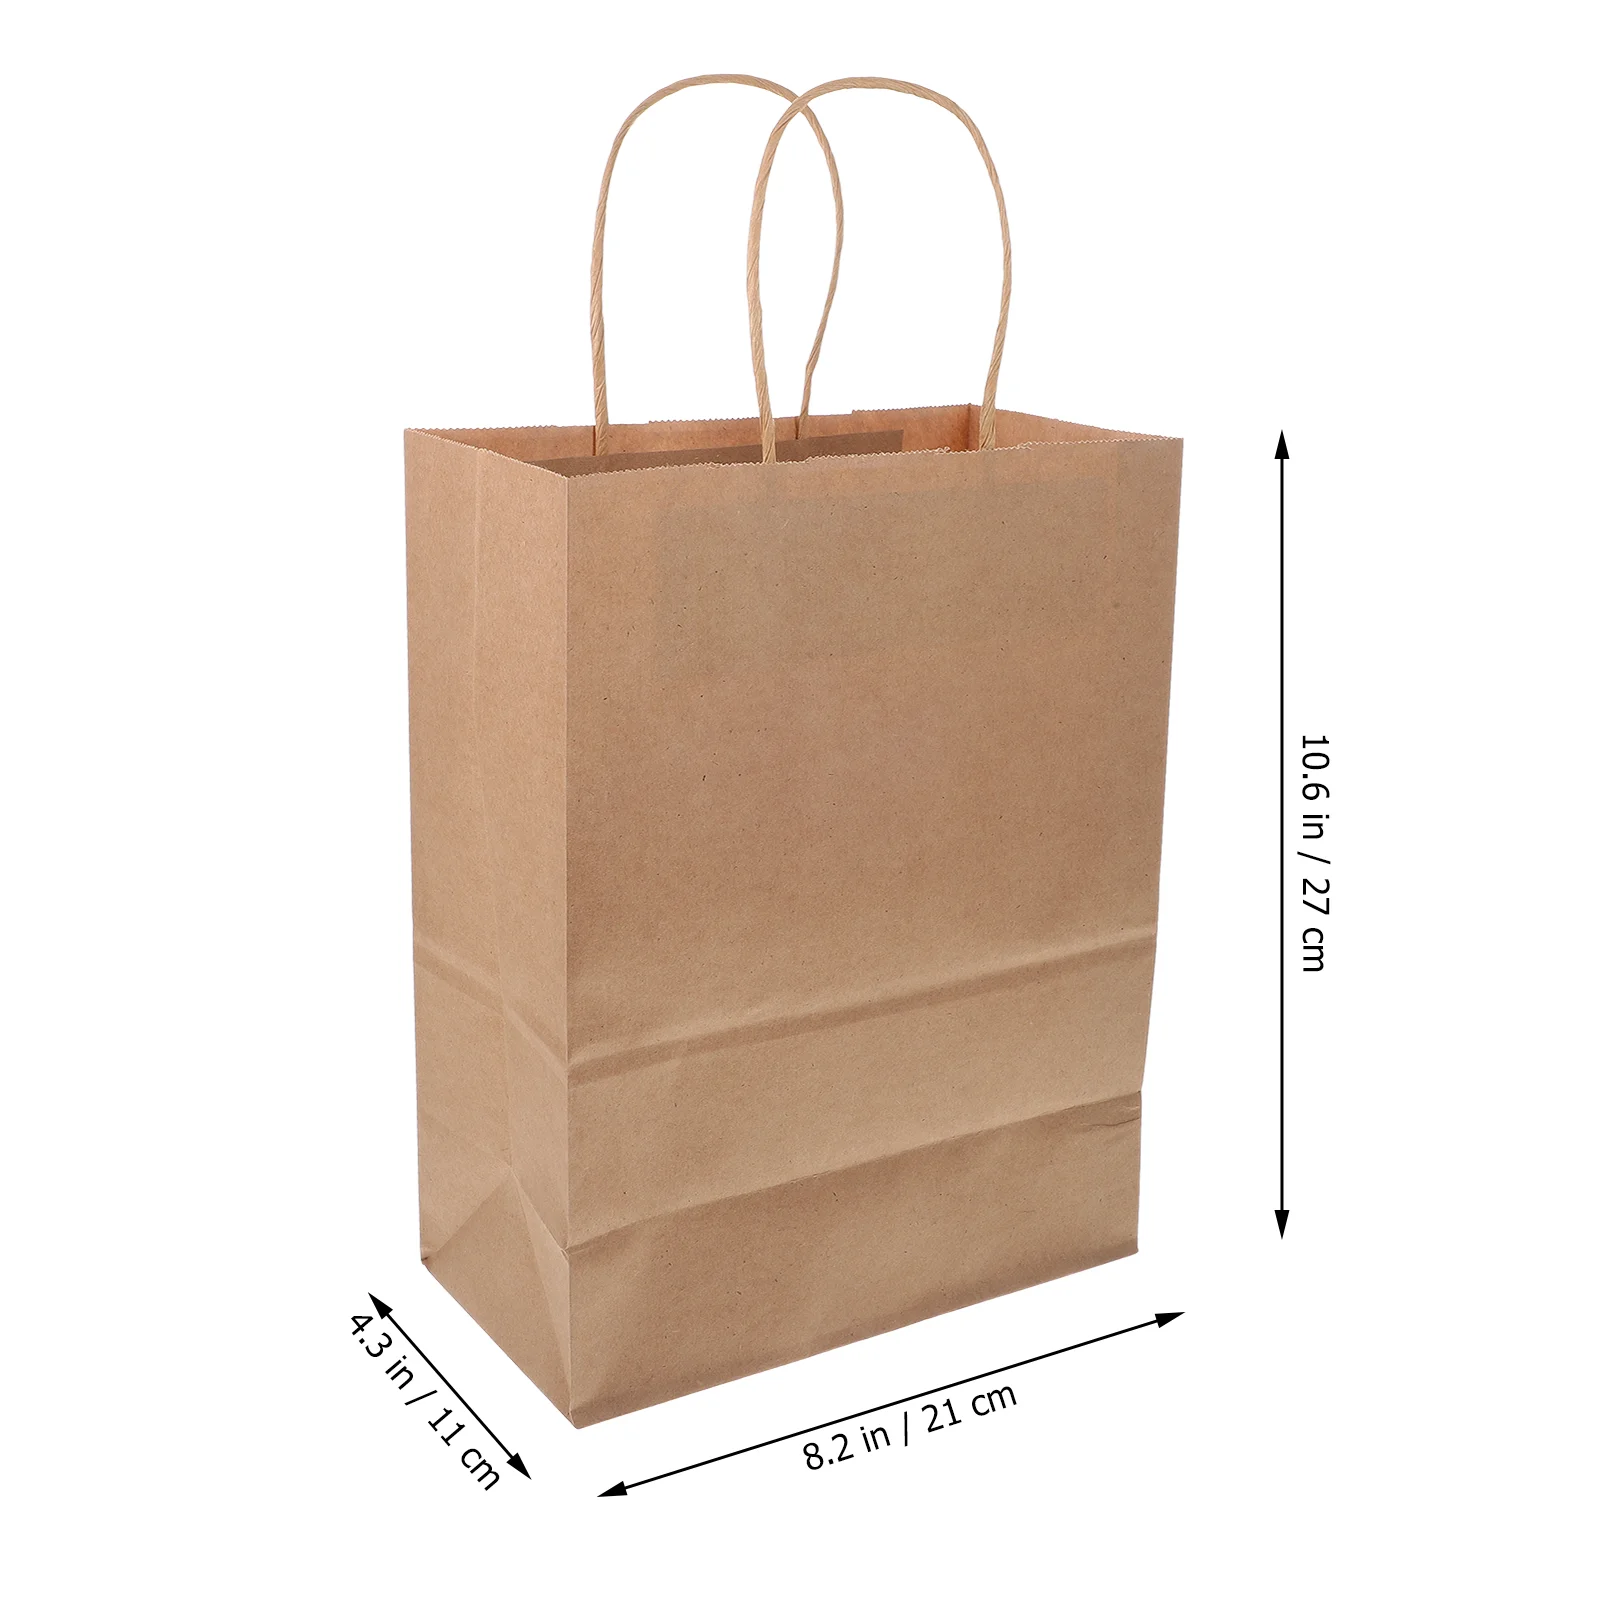 Recycled Paper Bags with Custom Branding | Eco-Friendly and Affordable